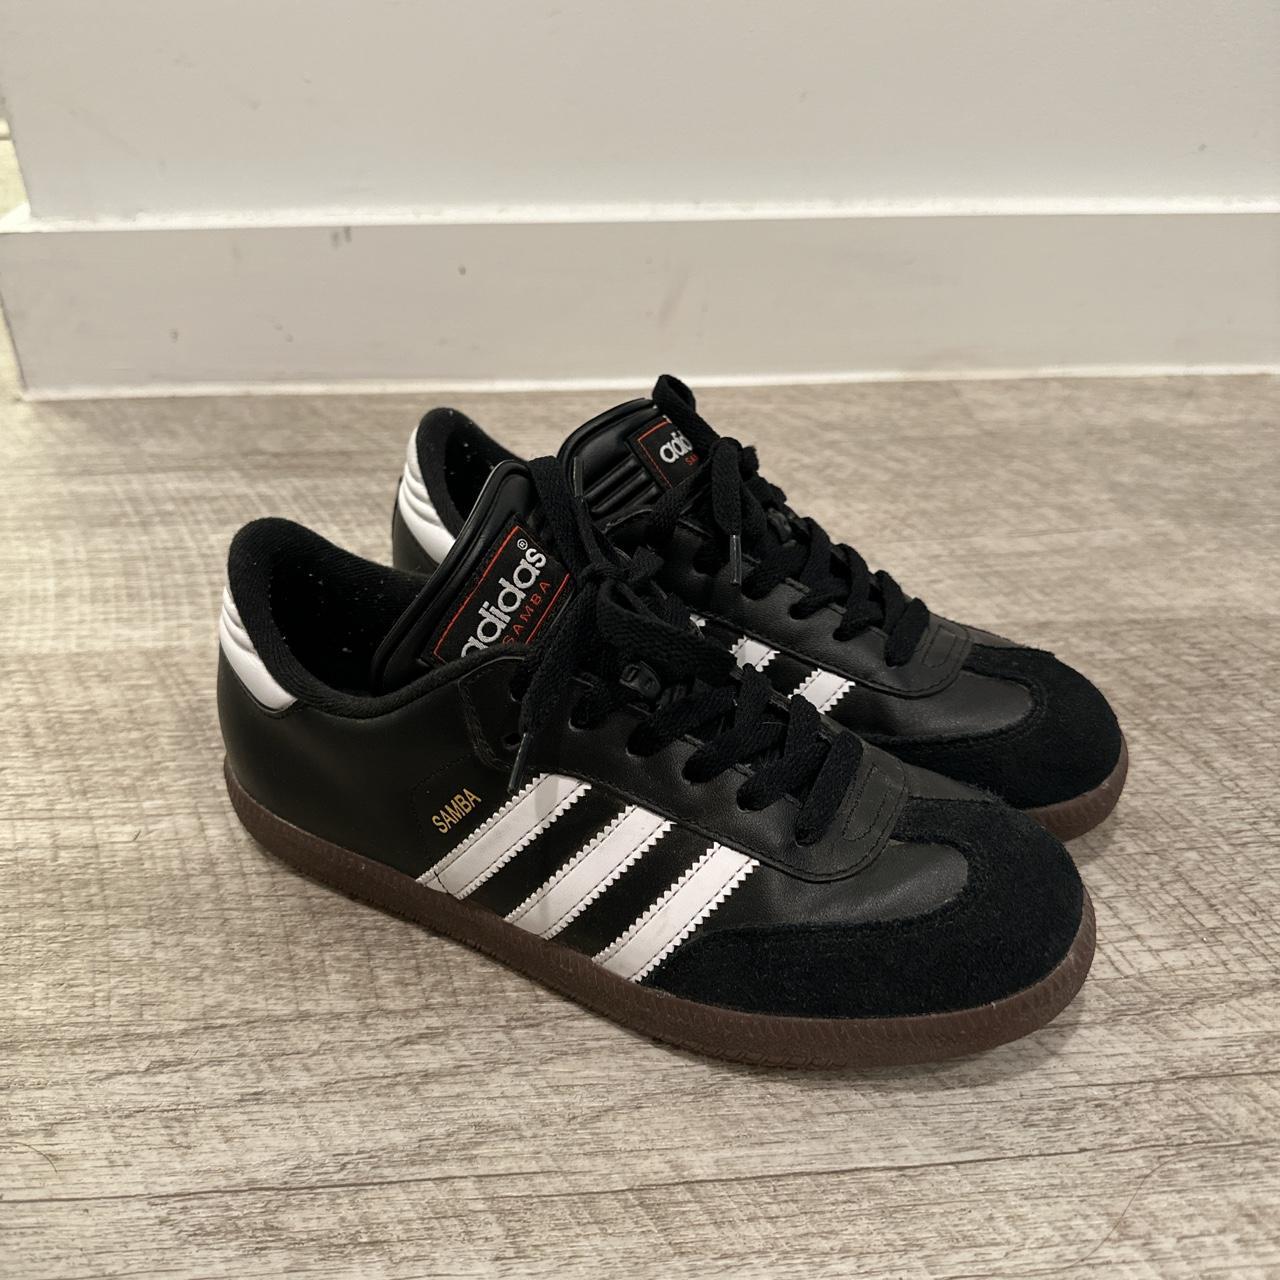 Adidas Women's Black and White Trainers